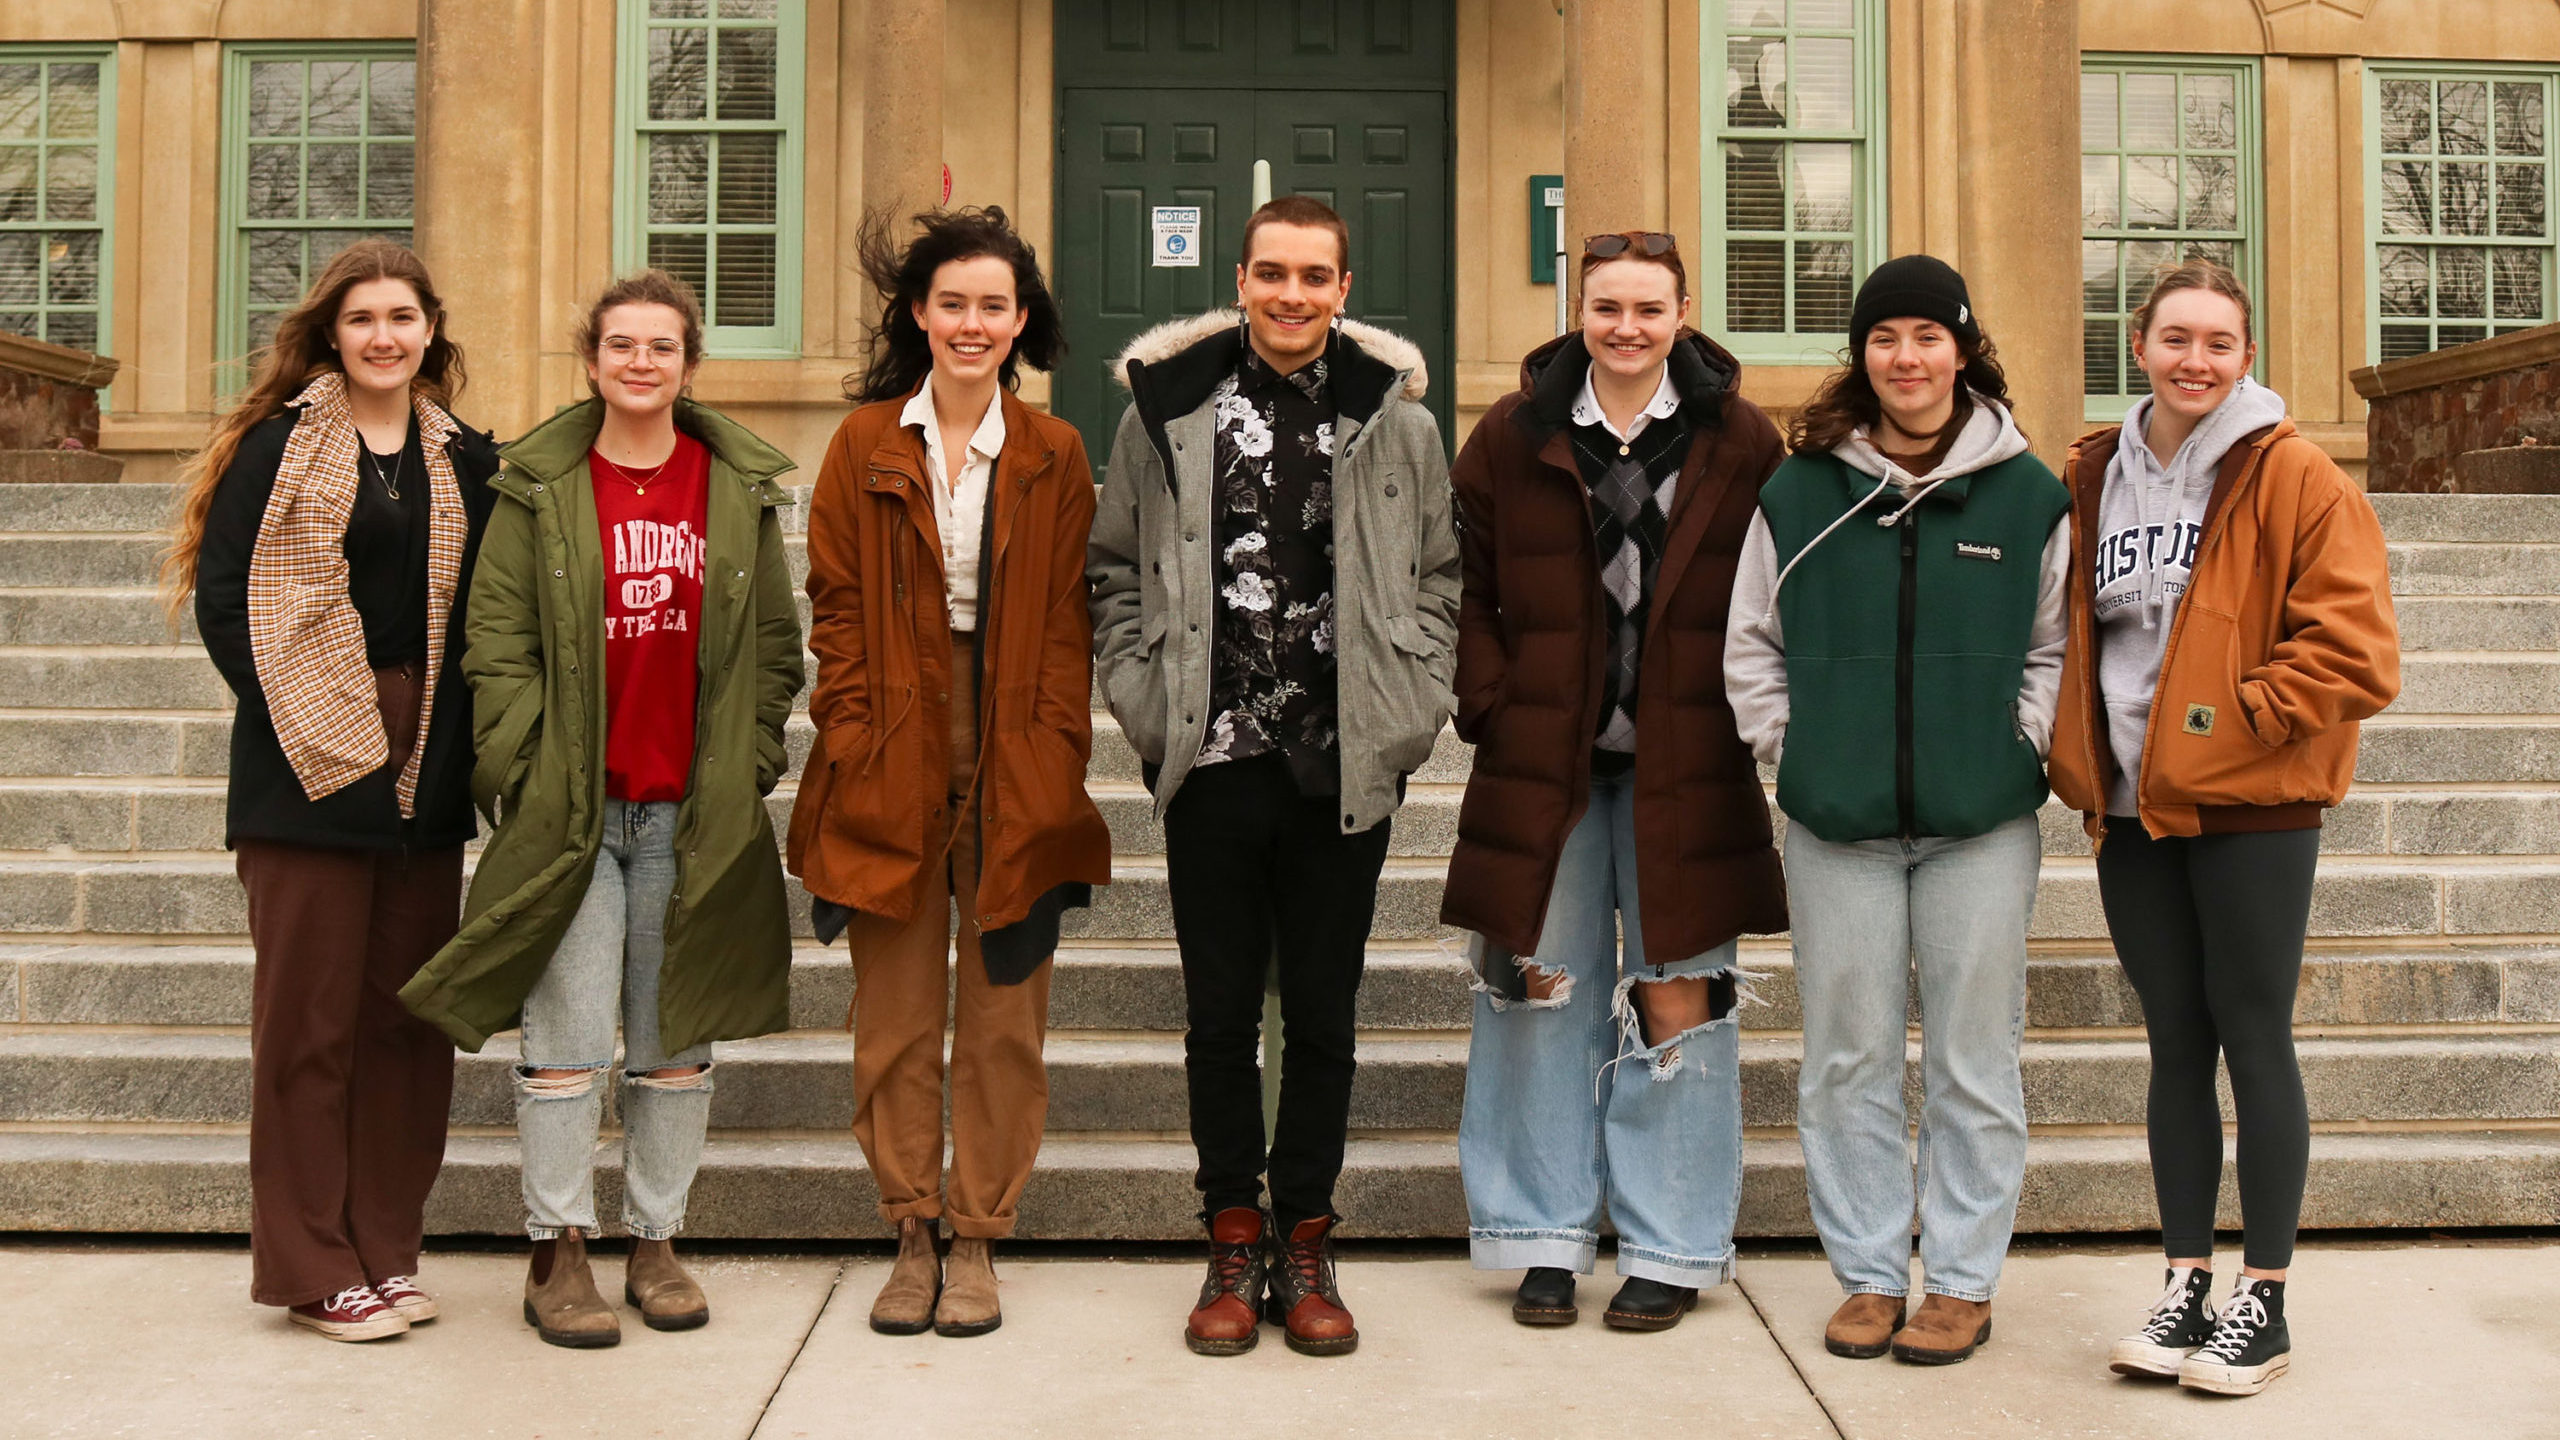 King’s Wellness Society’s executive team stands outside the campus library in Halifax on Thursday, February 17, 2022. (L-R): Grace Lloyd, administrative director; Amy Dolland, internal events coordinator; Maggie Power, diversity, inclusion and accessibility student advocate; Jonathon Gotlib, president; Olivia Piercey, communications director; Shay Forbes, director of social media and Sam Flood, vice president.